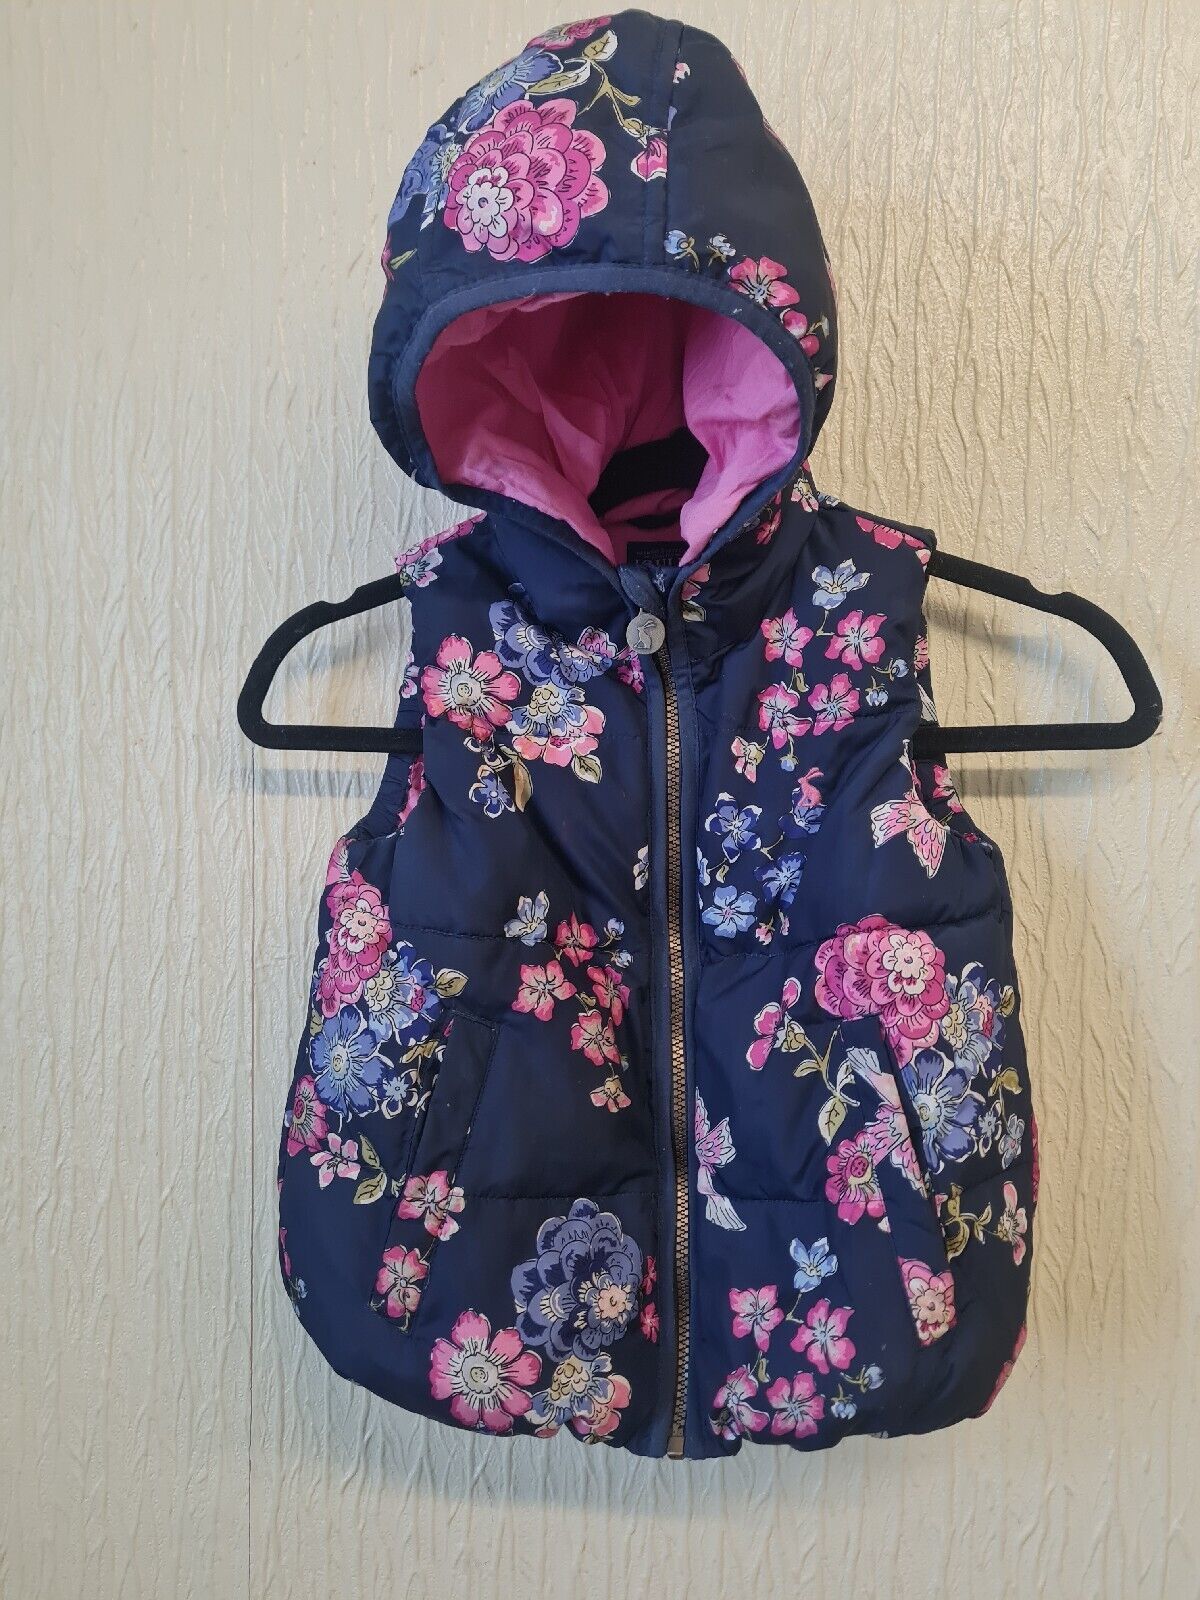 Primary image for Joules Blue And Pink Flowery  Sleeveless Jacket For Girls 5yrs Express Shipping